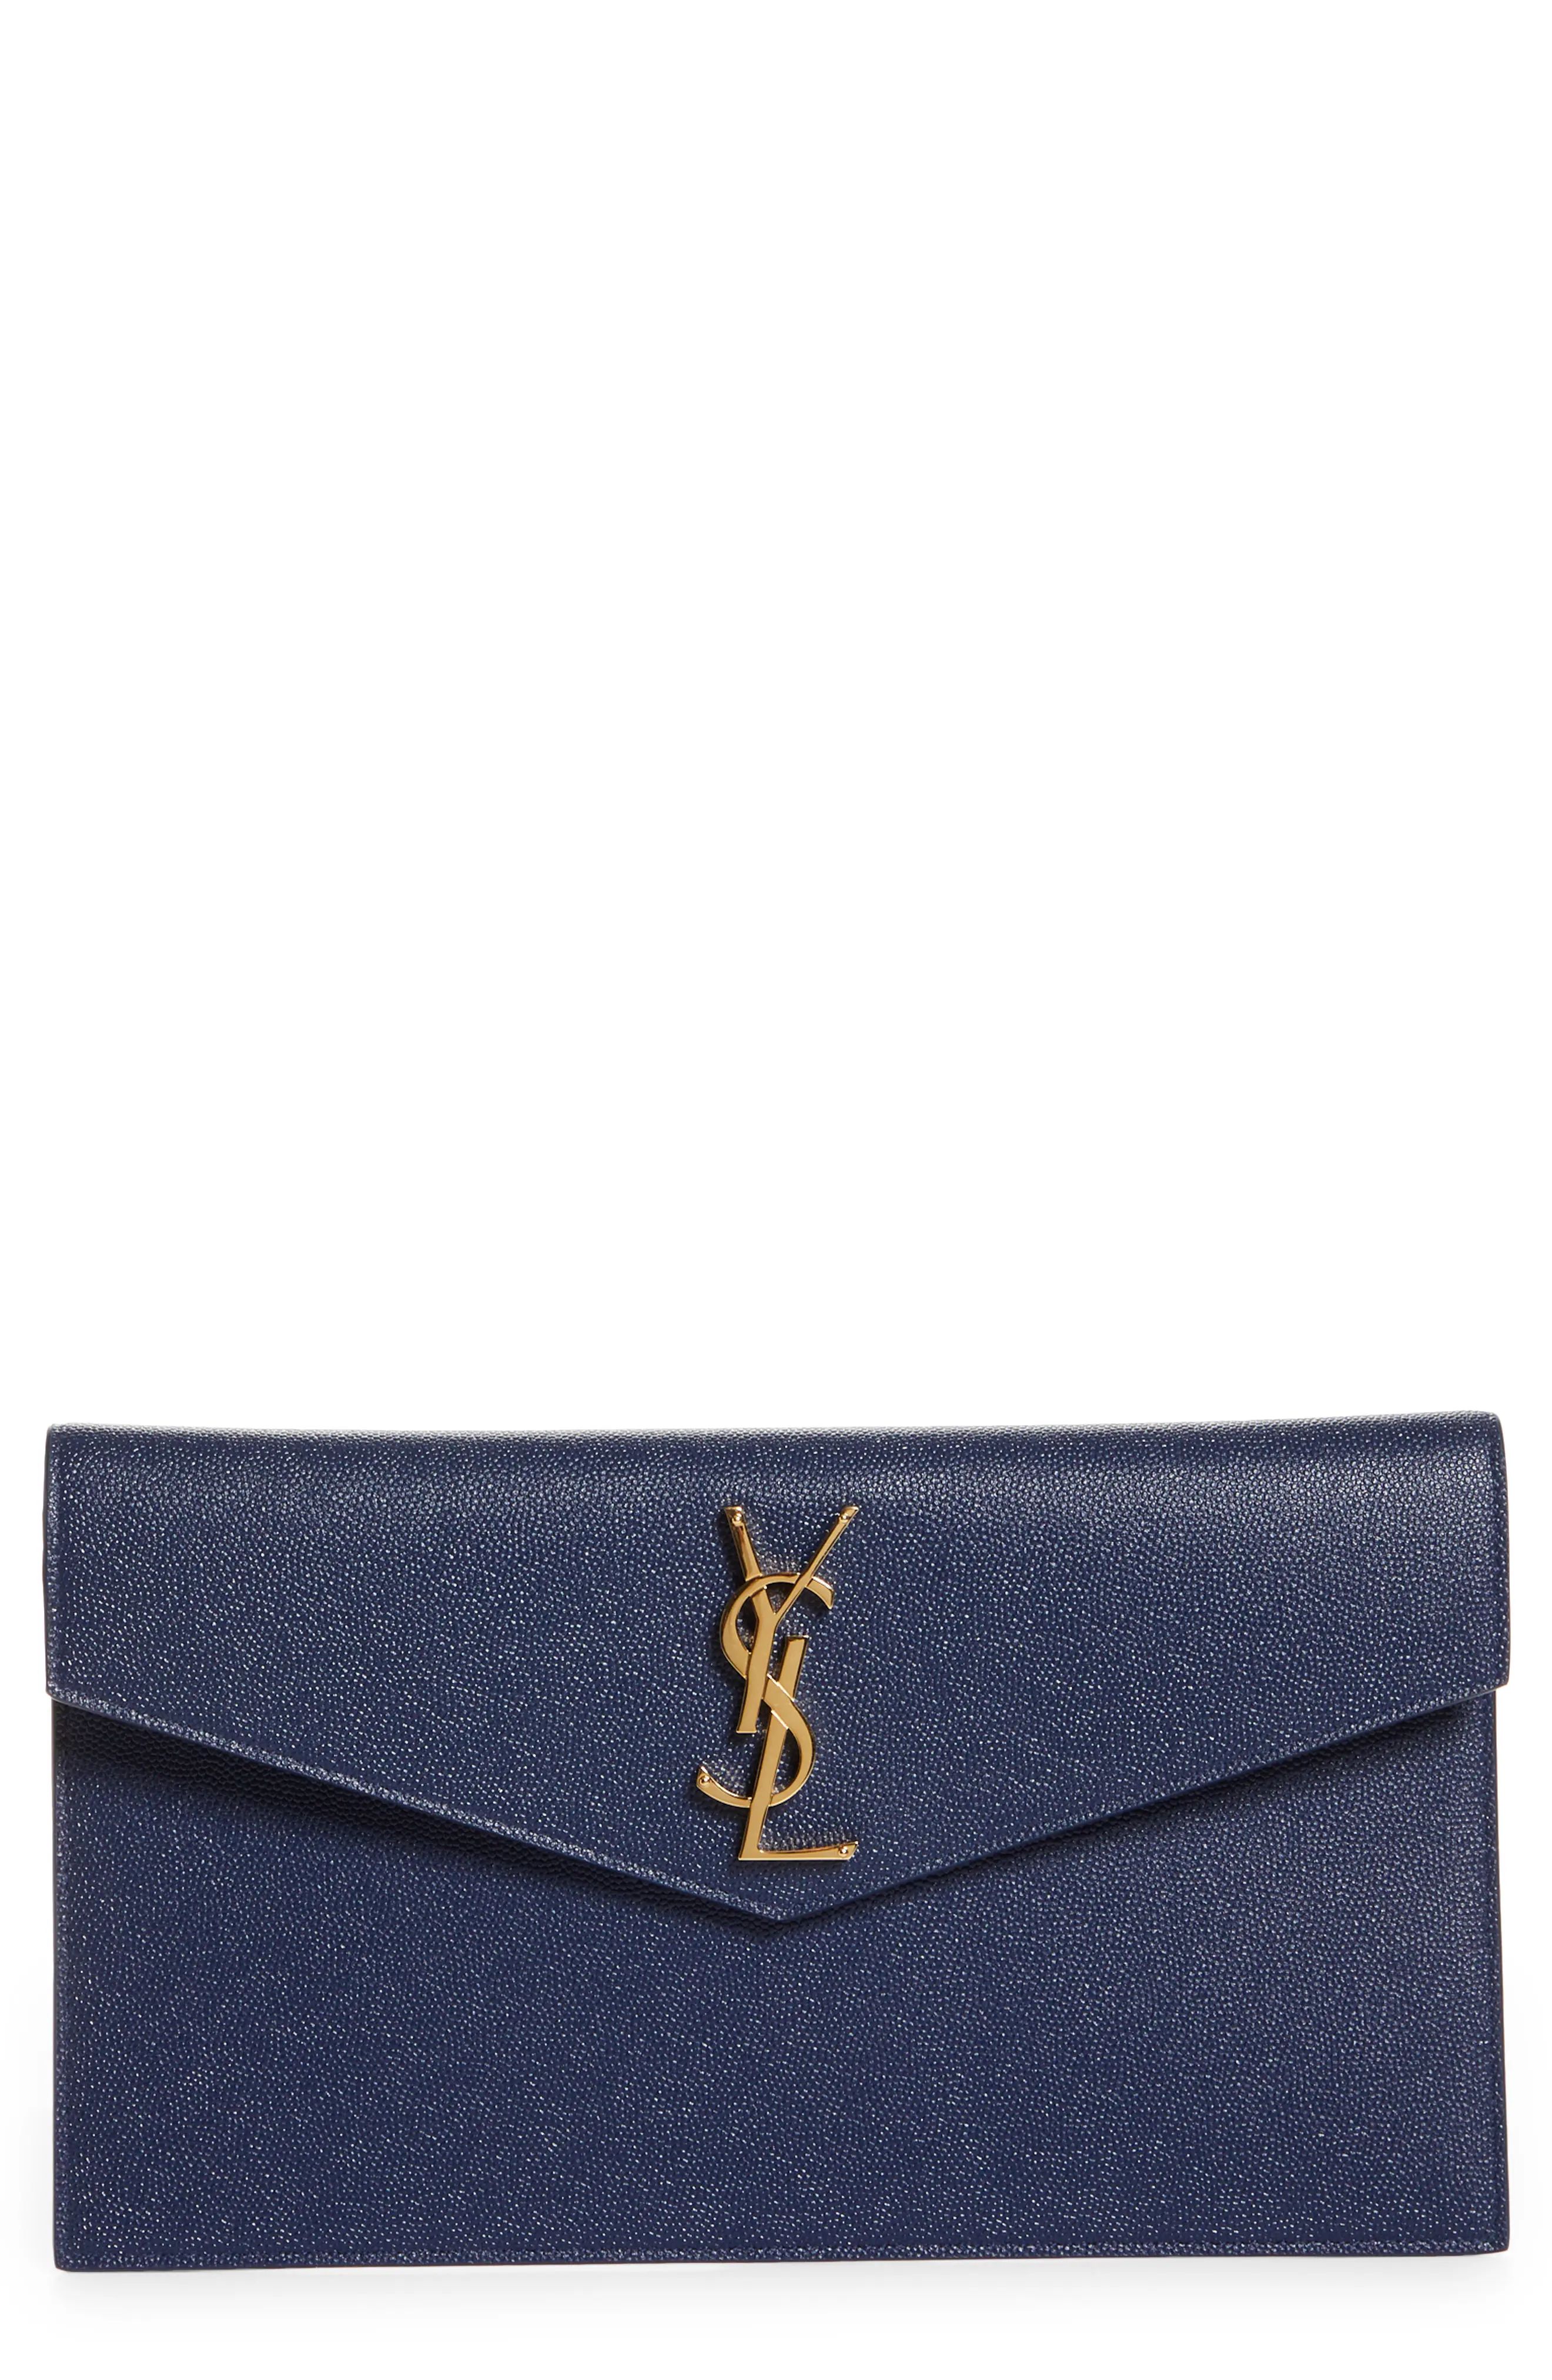 Saint Laurent Uptown Pebbled Calfskin Leather Wallet on a Chain in Blue Charron at Nordstrom | Nordstrom